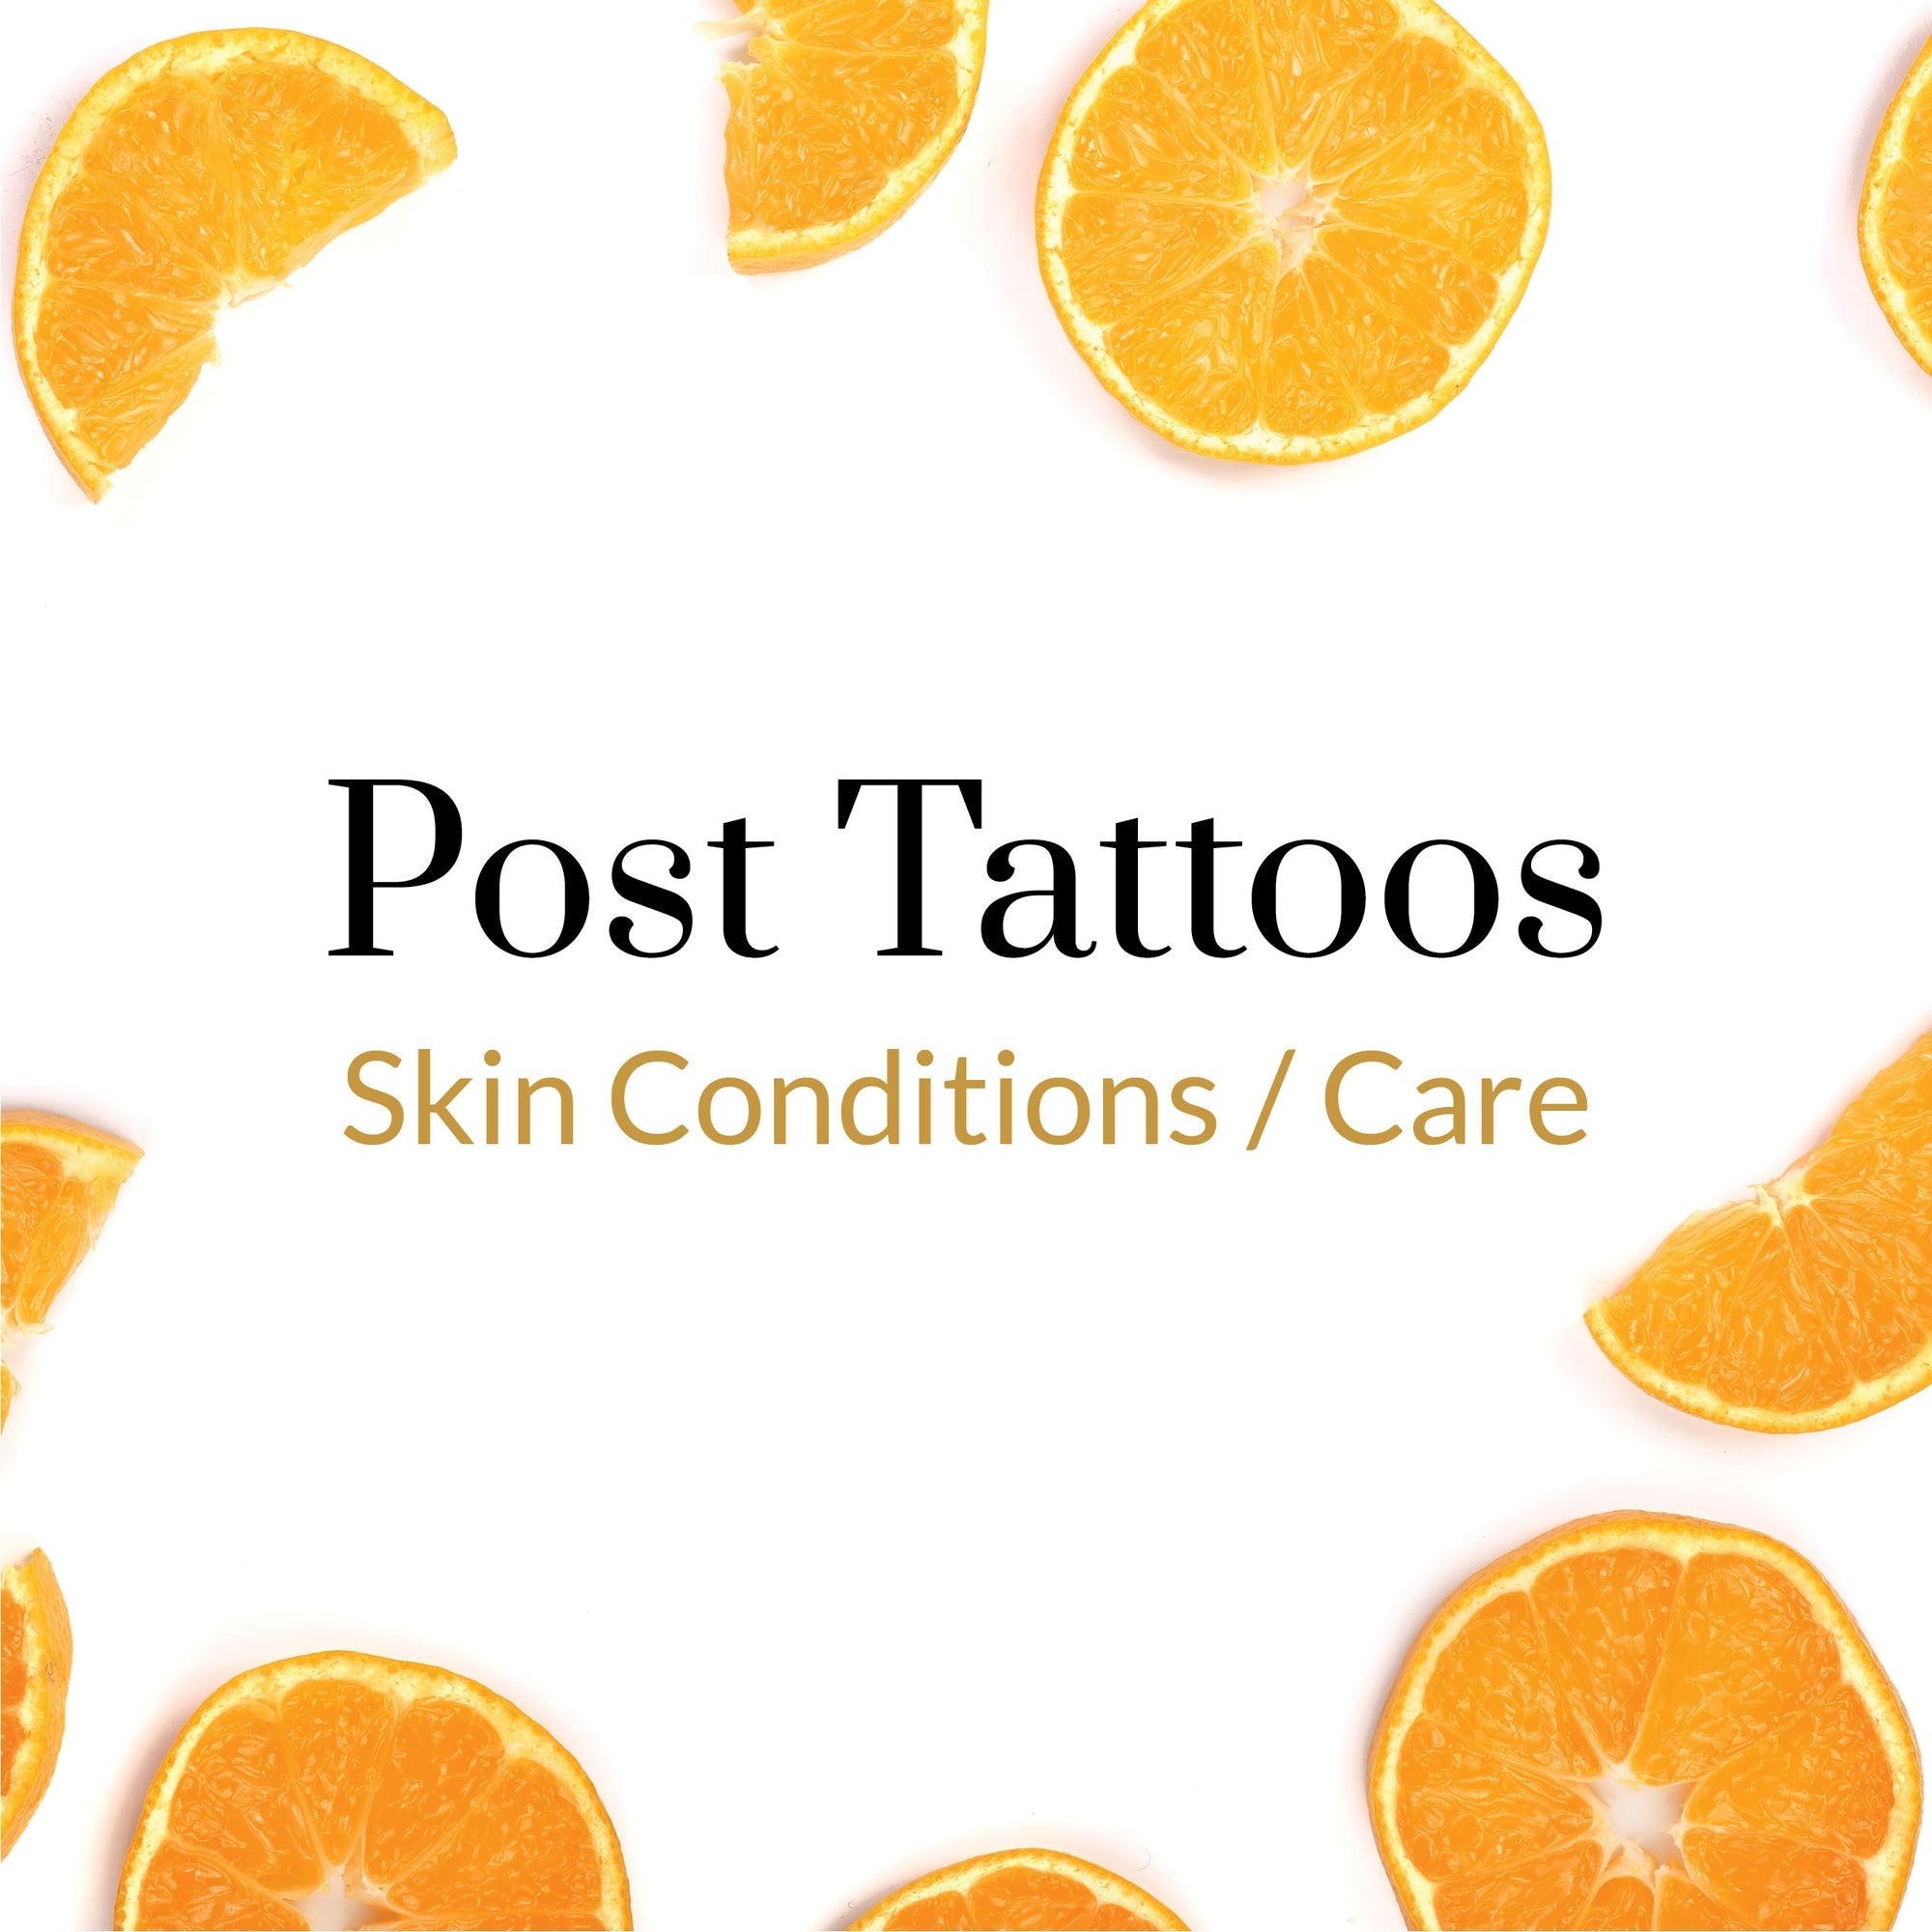 Skin Conditions/Care - Post Tattoos